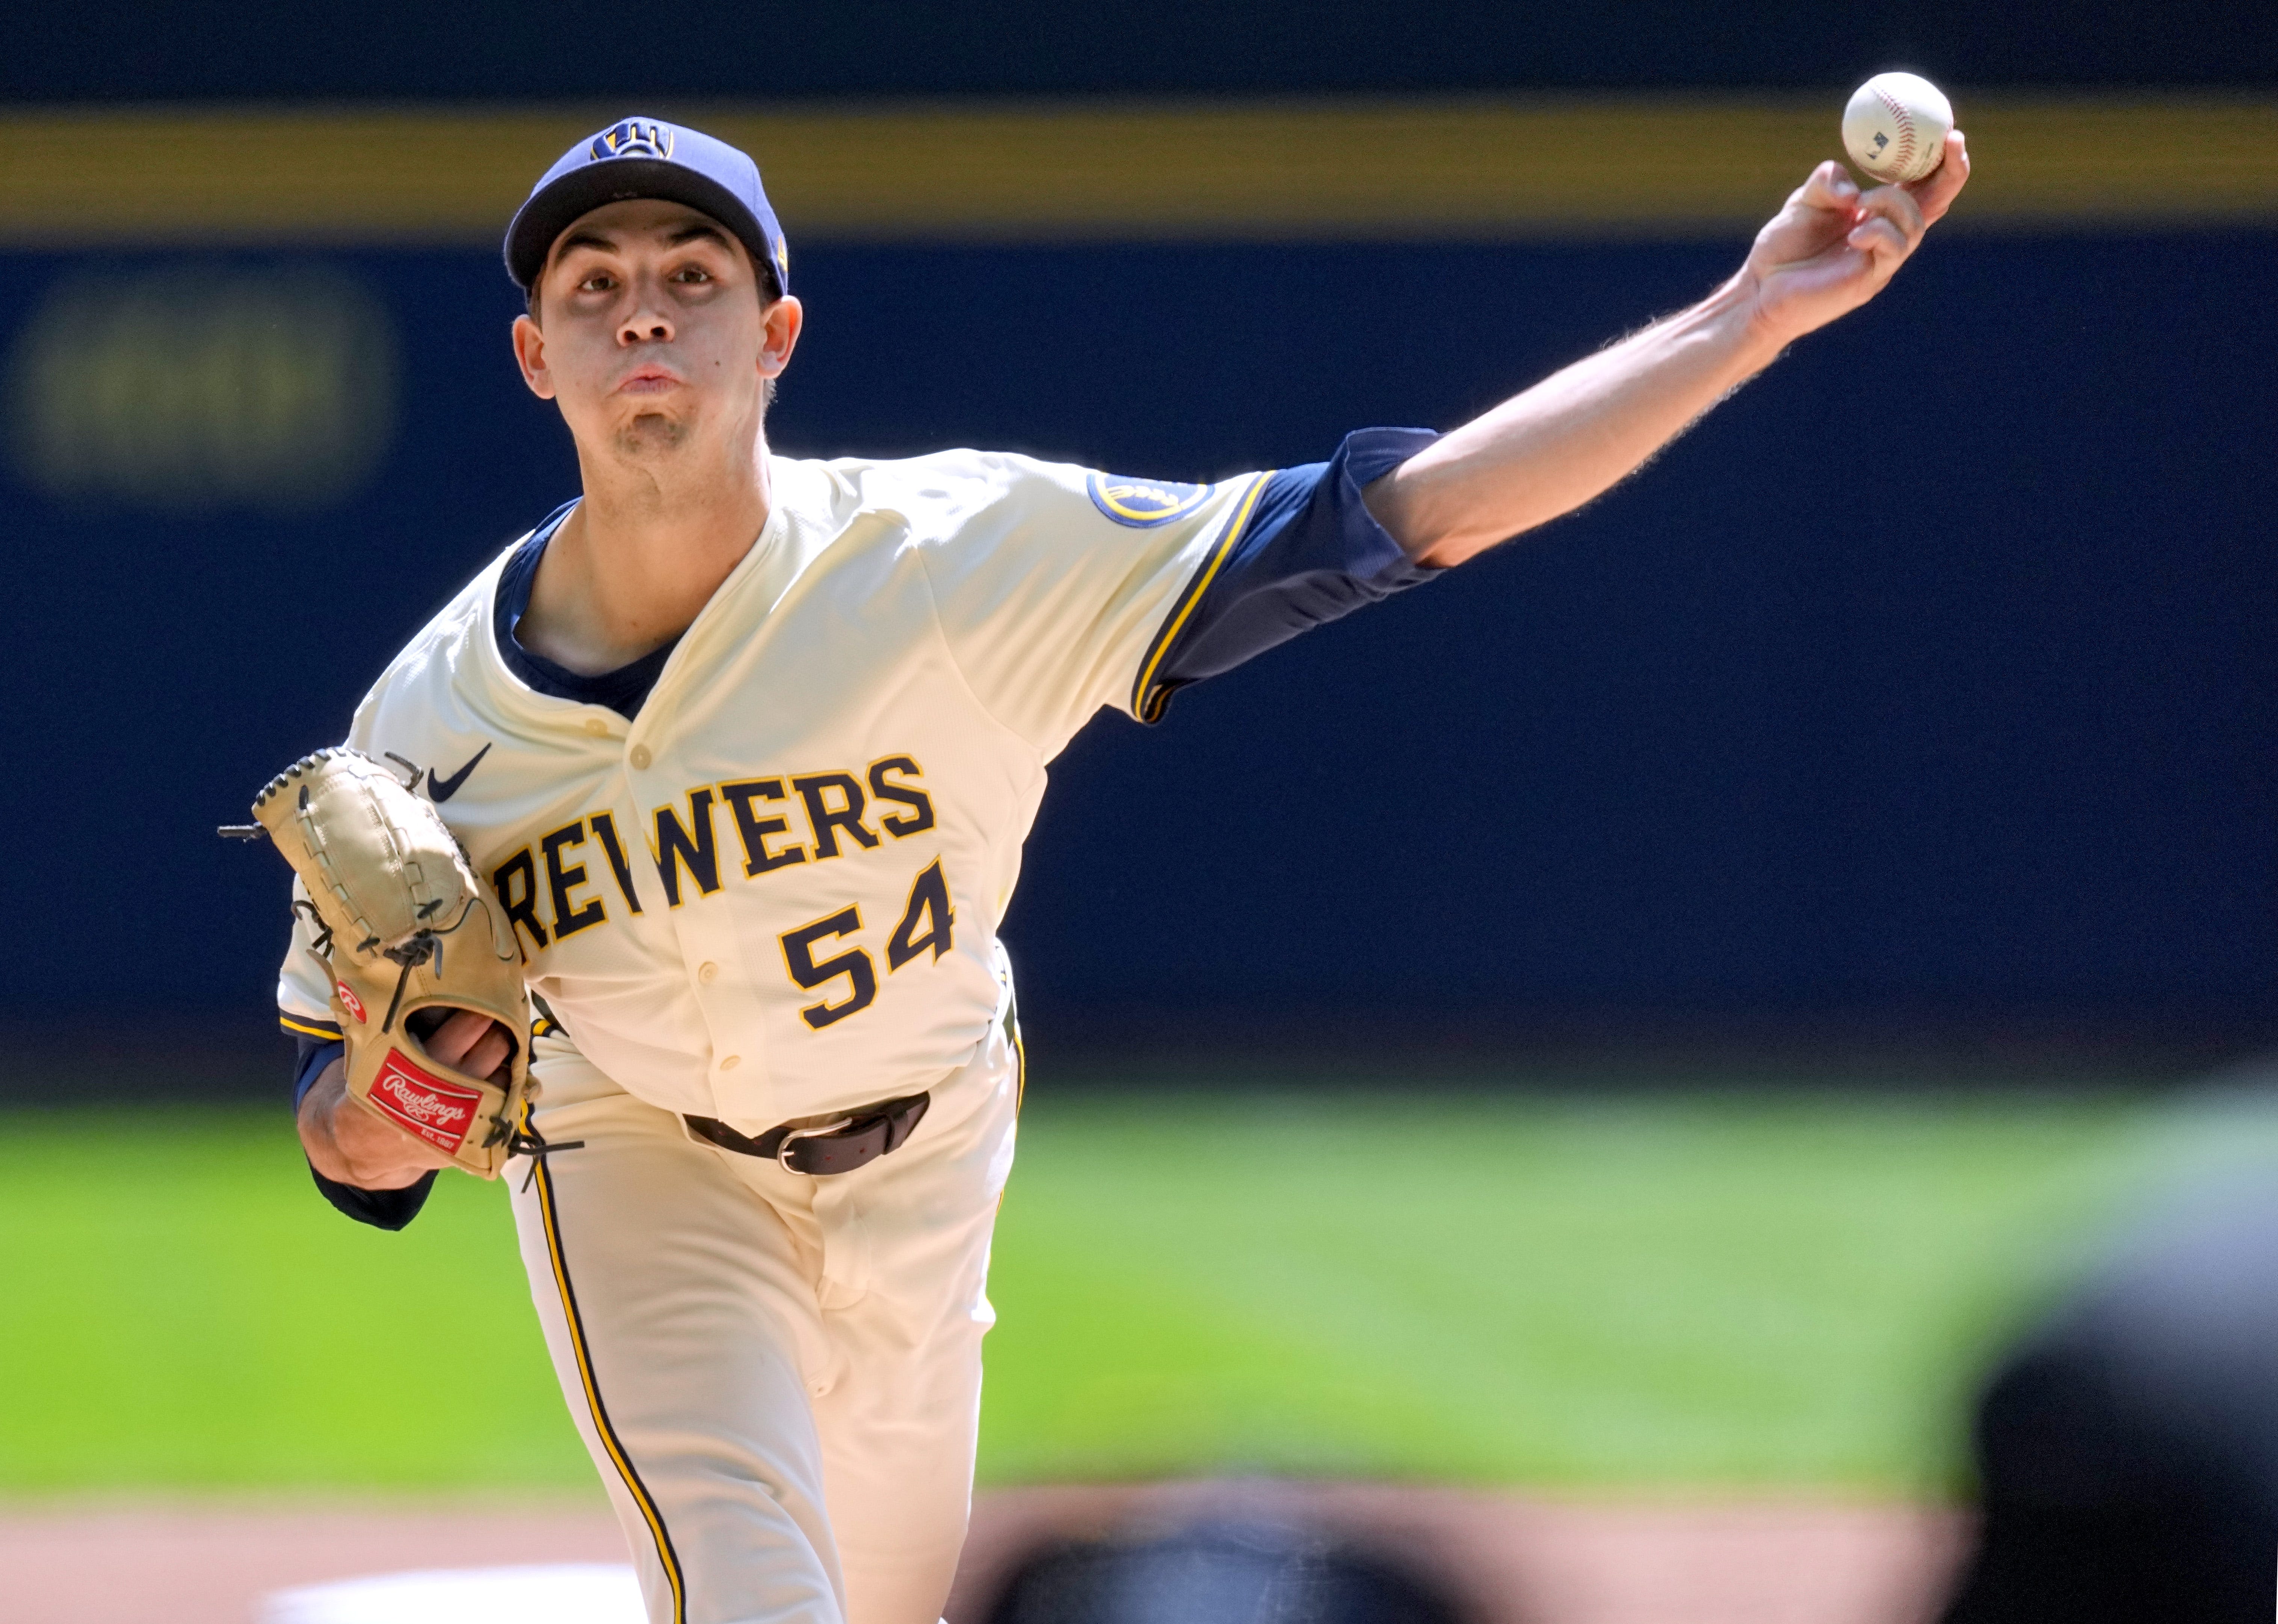 Milwaukee Brewers vs Pittsburgh Pirates: live score, game highlights, starting lineups